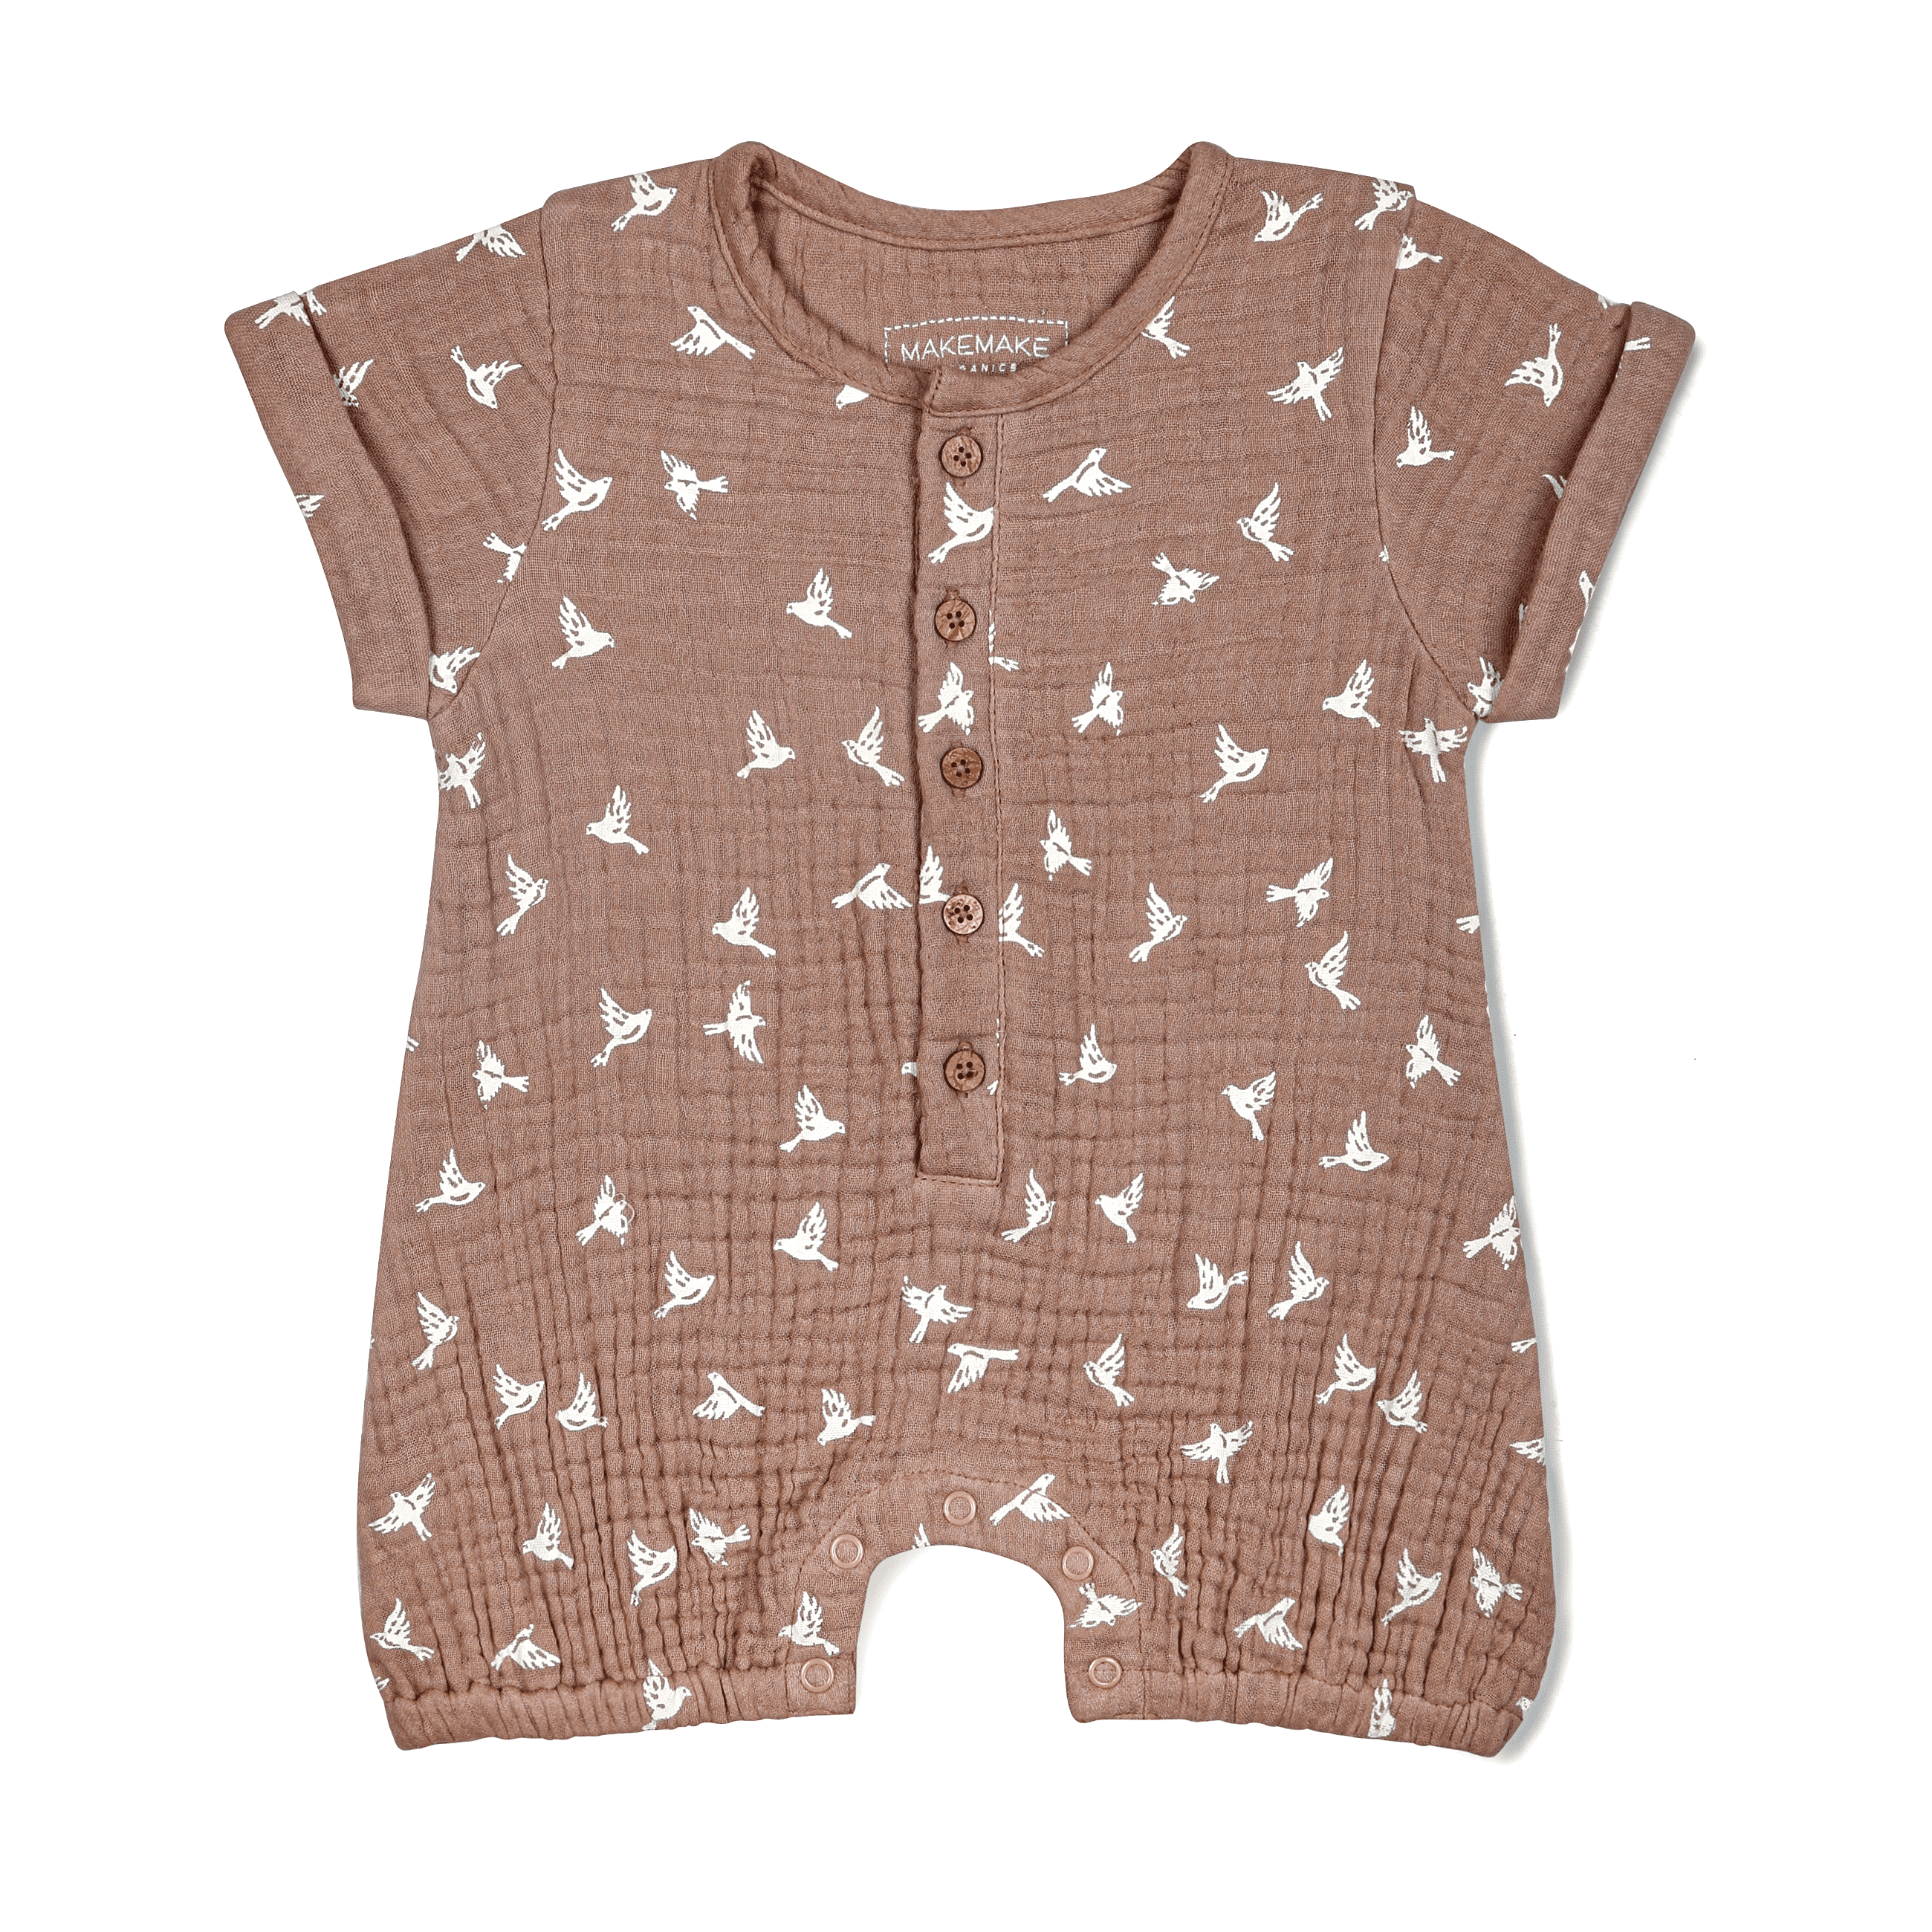 A brown toddler romper with an all-over white bird print, featuring short sleeves, snap buttons down the front and around the legs - Makemake Organics Organic Muslin Short Bubble Romper in Flock design - displayed flat on a white background.